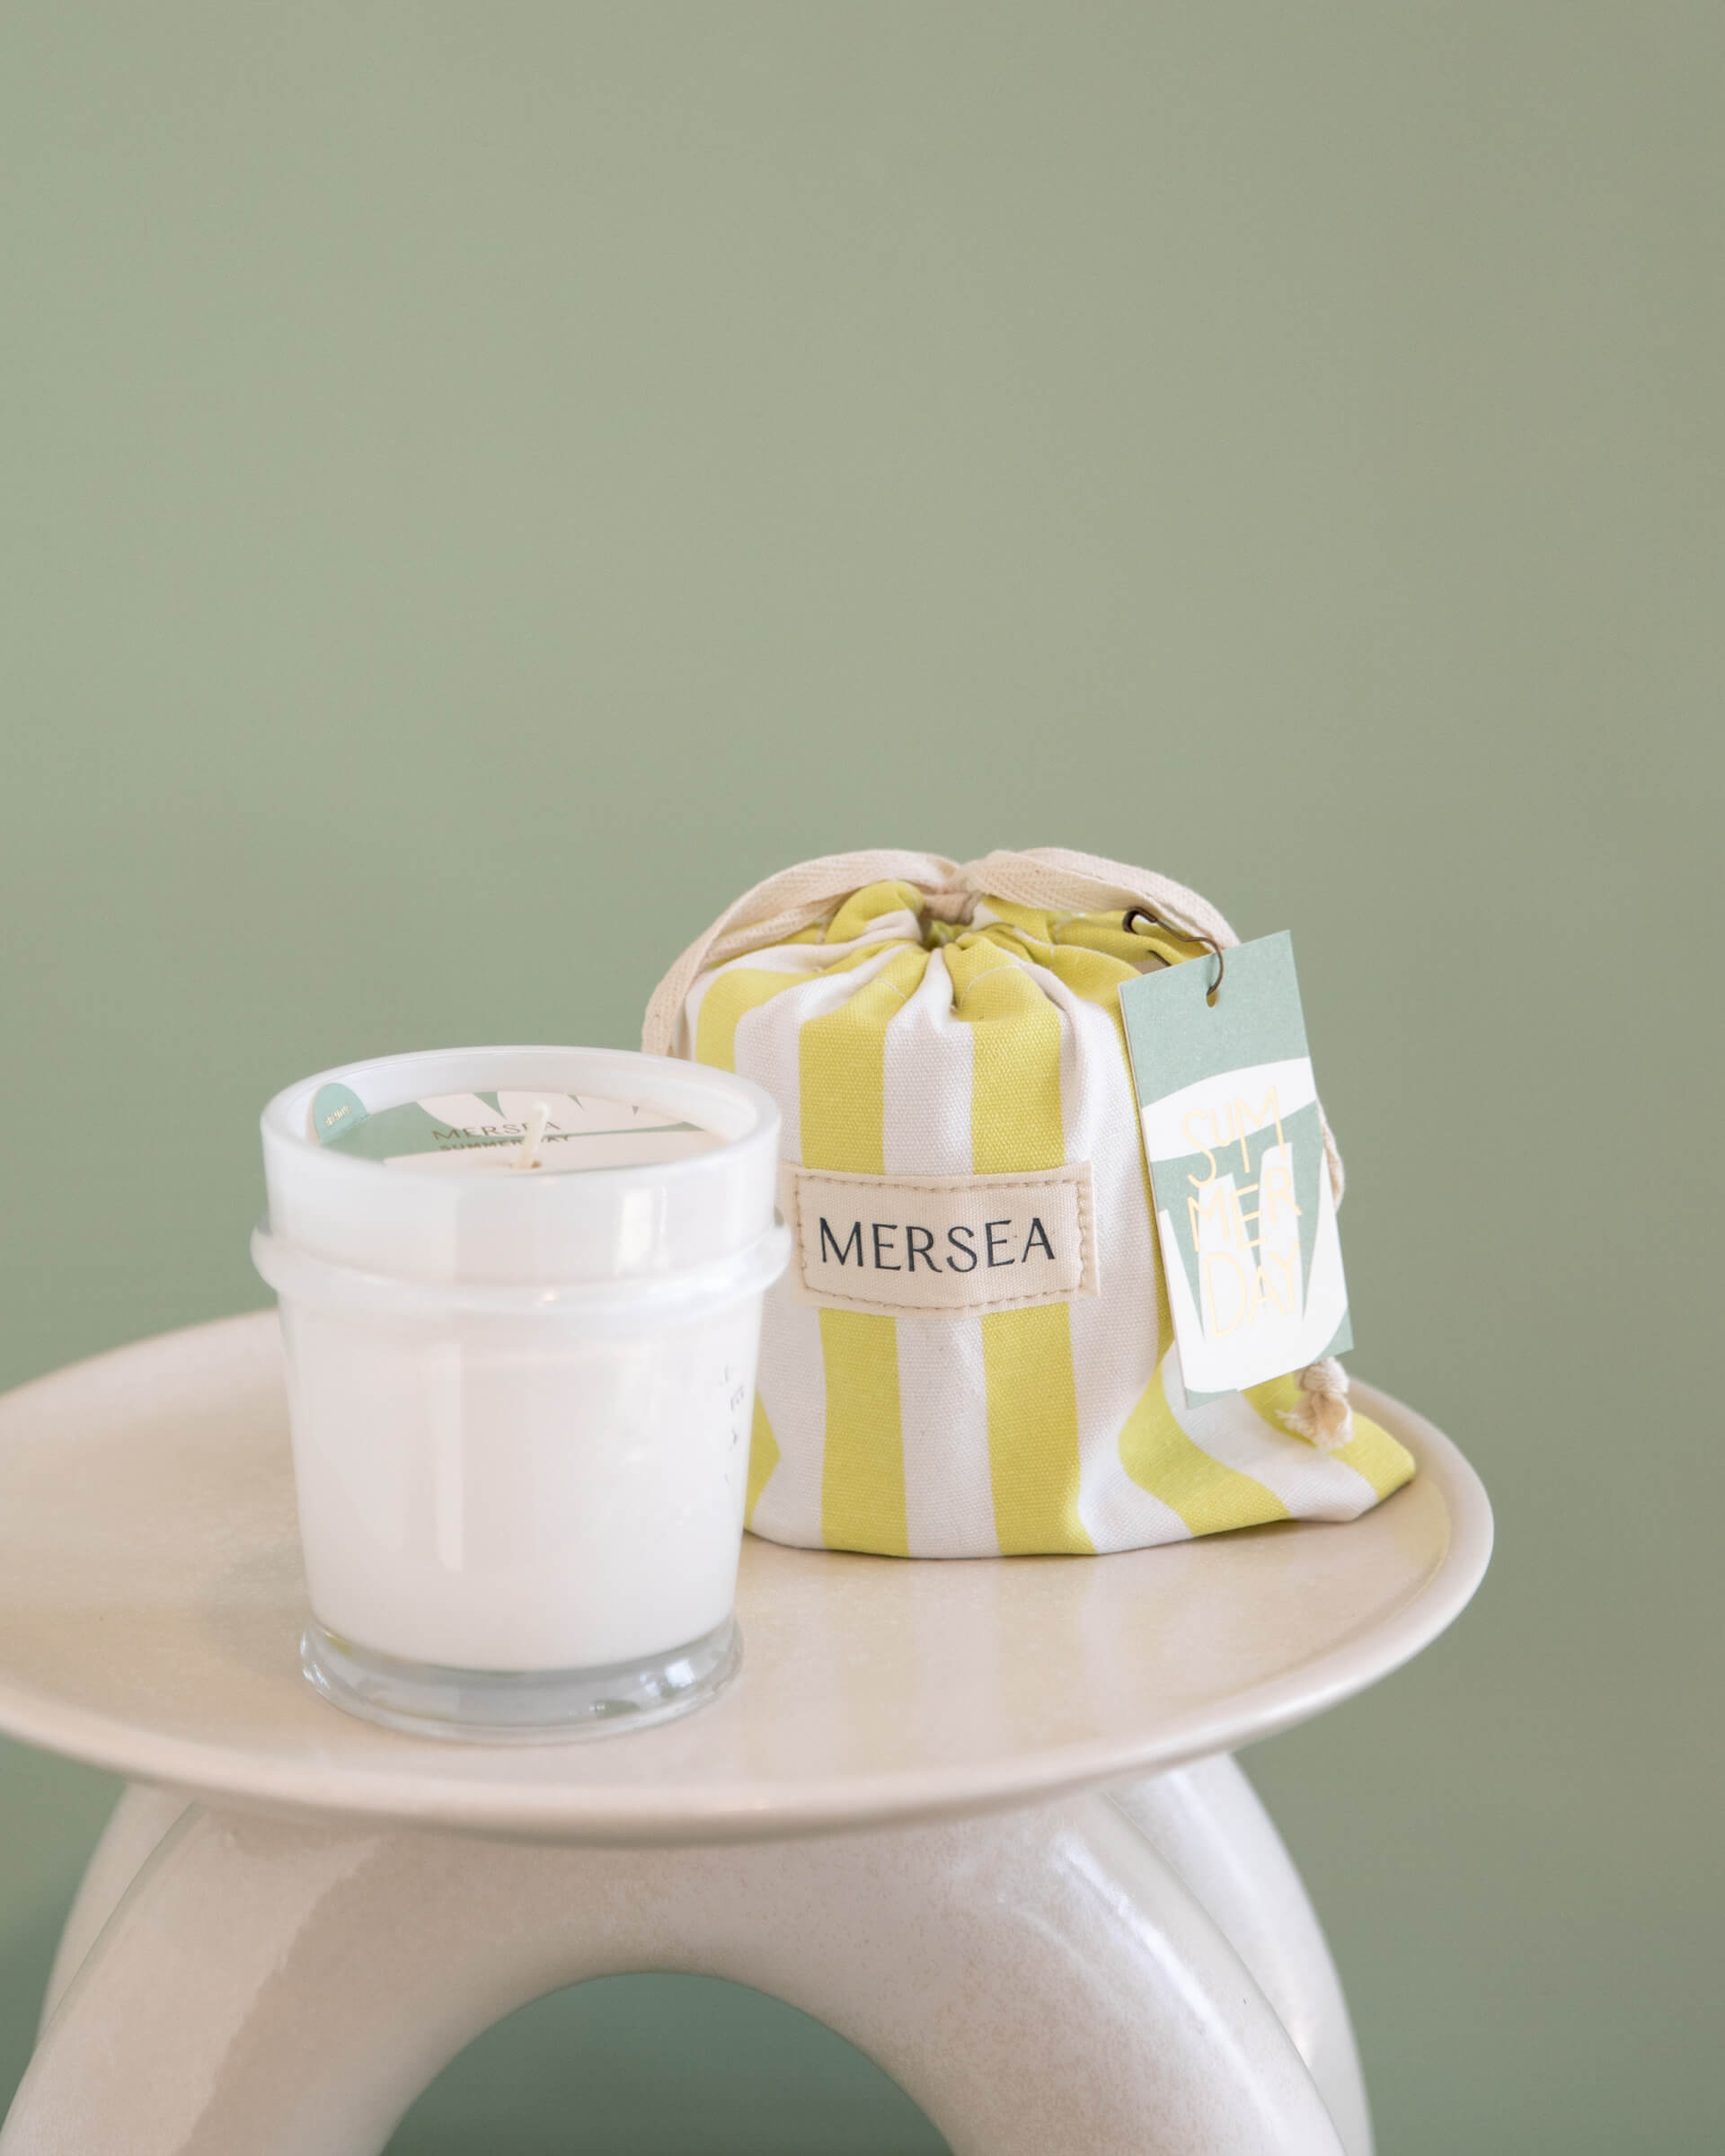 6.5 oz summer day sandbag candle in yellow and white striped bag on a green background